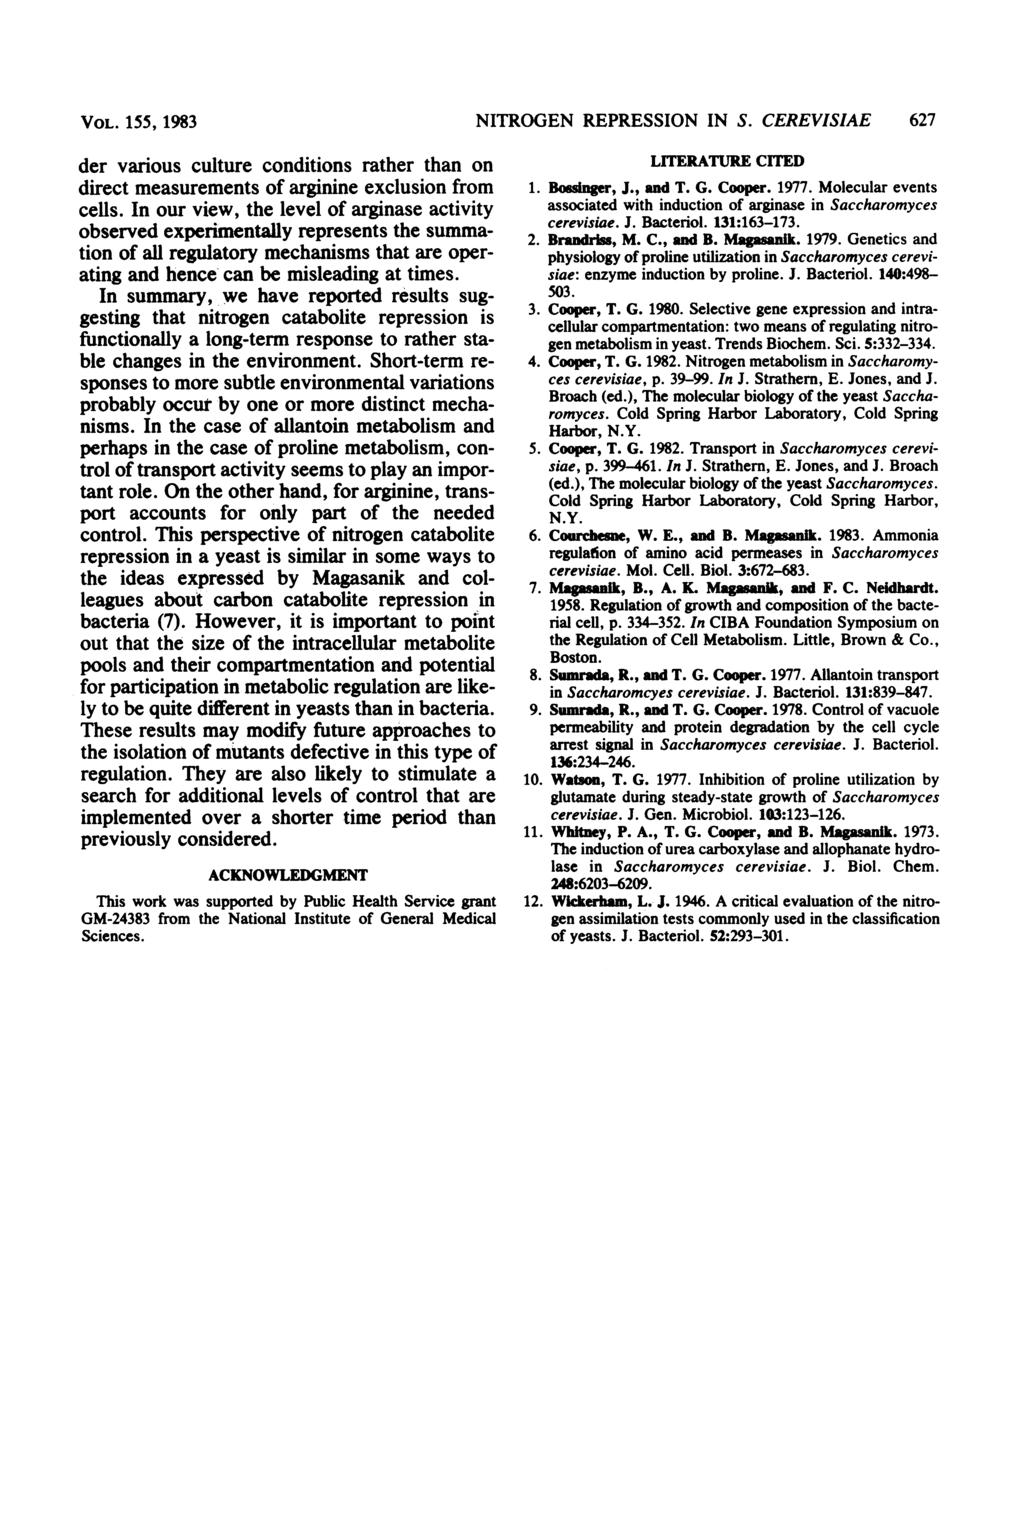 VOL. 1S5, 1983 der various culture conditions rather than on direct measurements of arginine exclusion from cells.